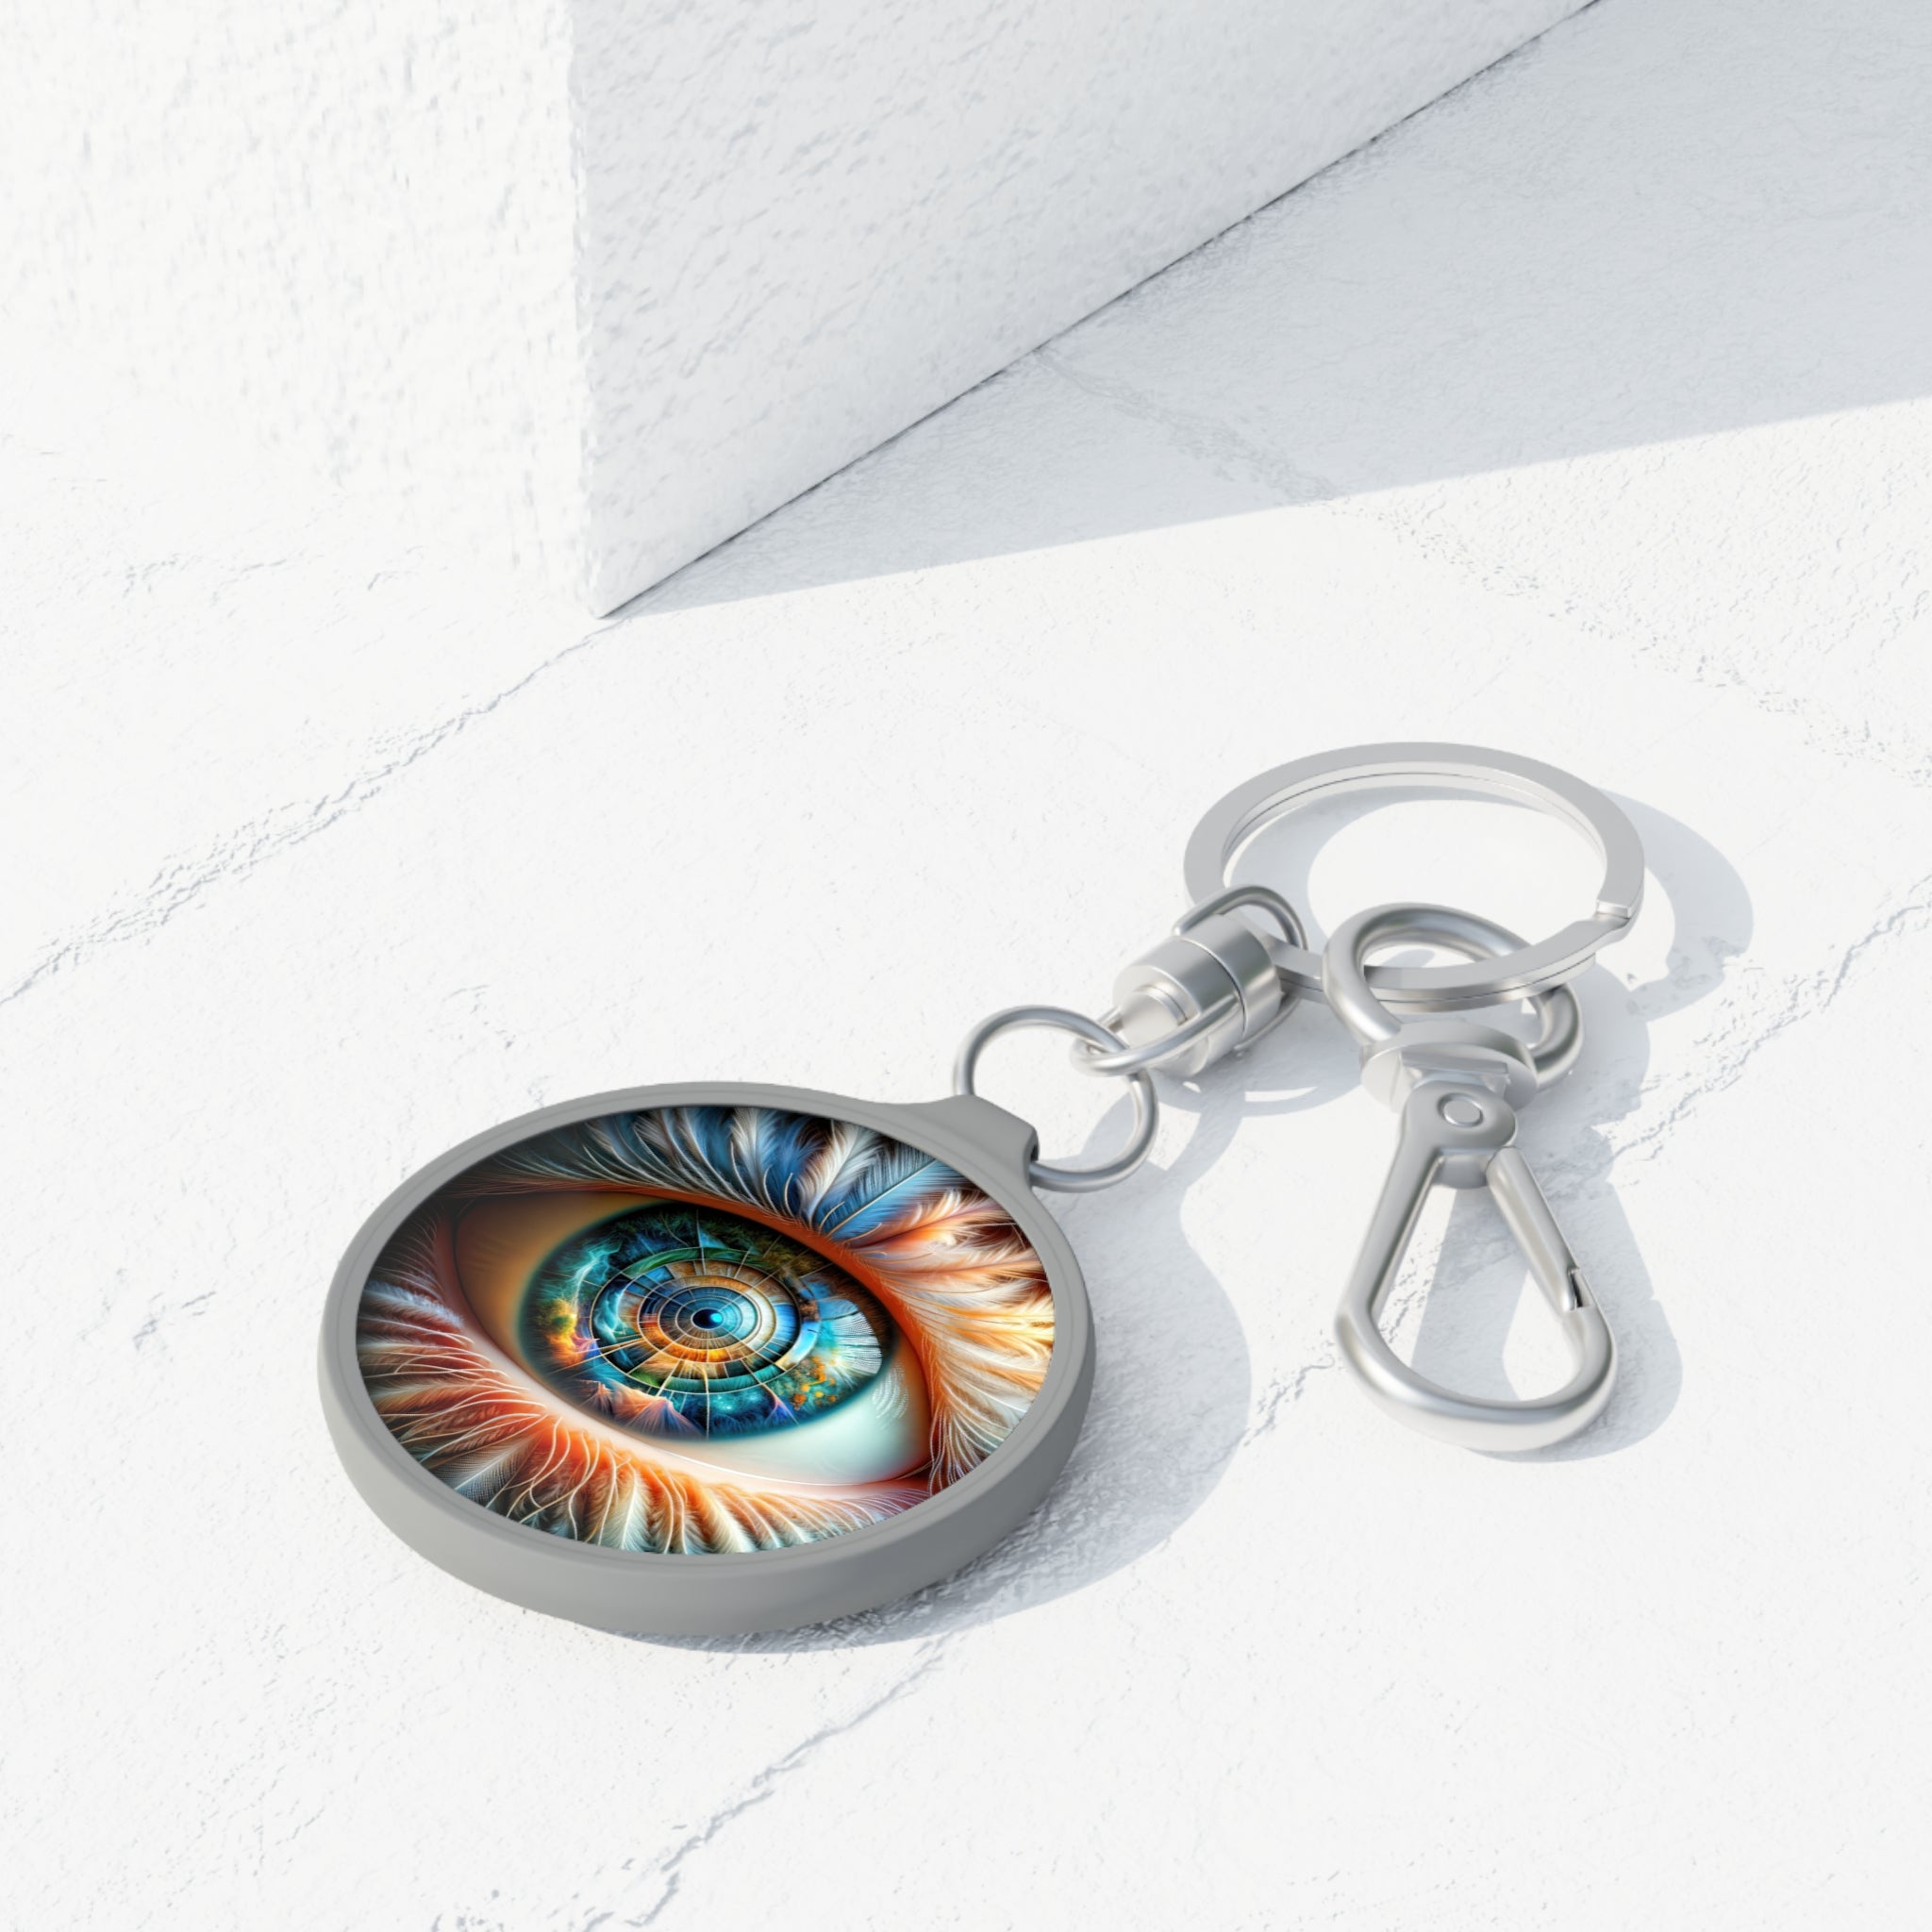 Visions of the Void Keyring Tag